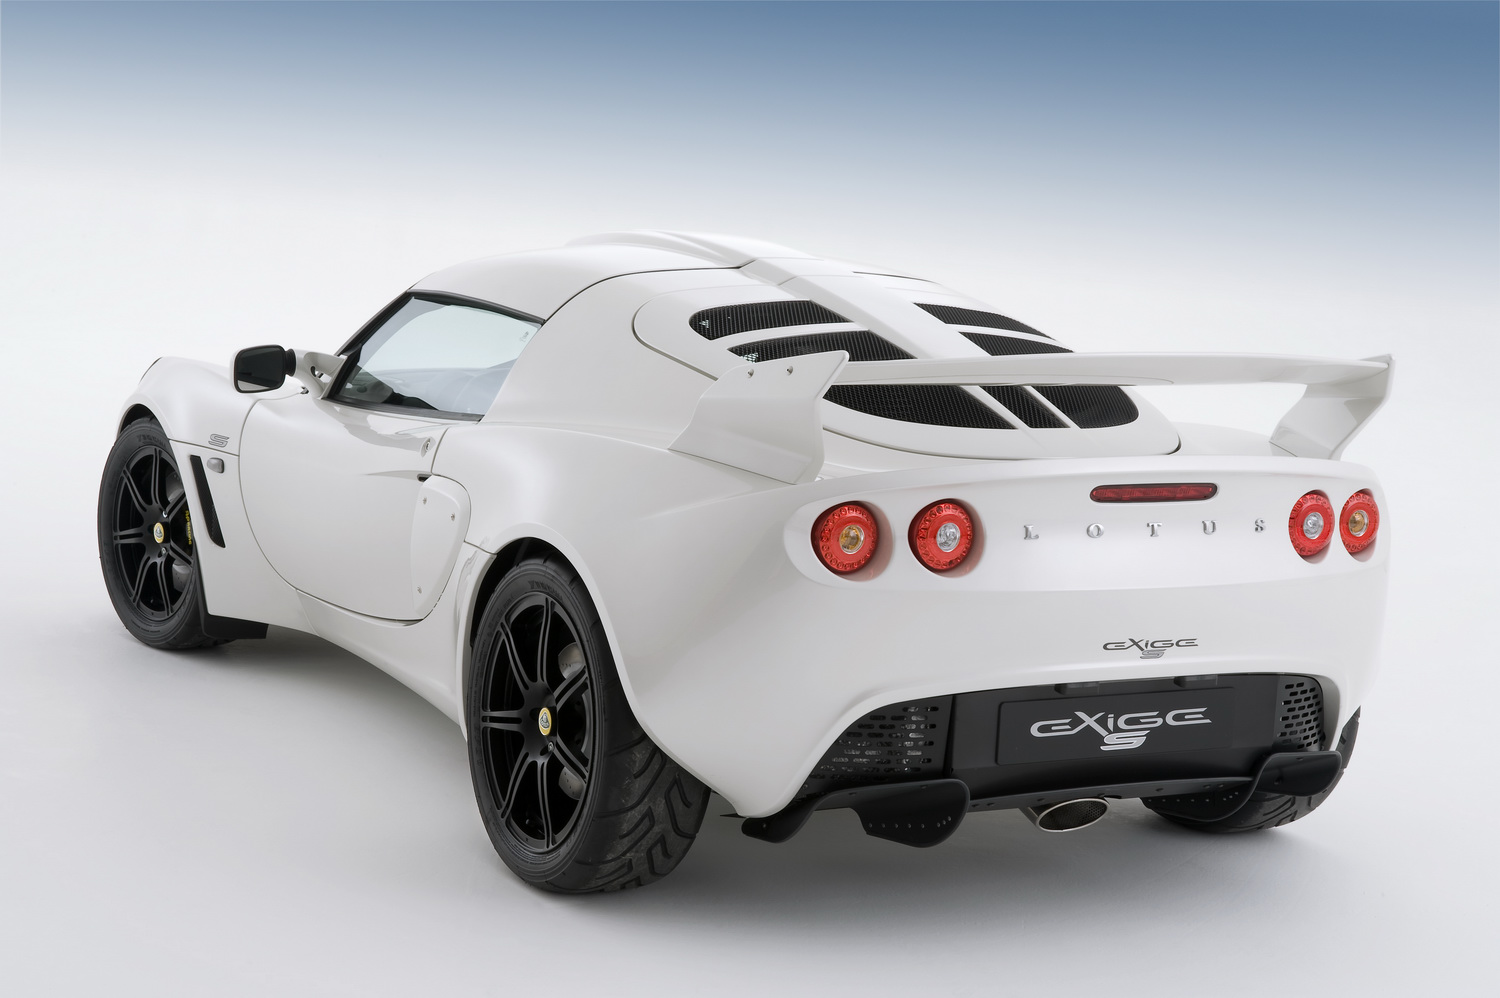 Lotus Exige S with V6 engine